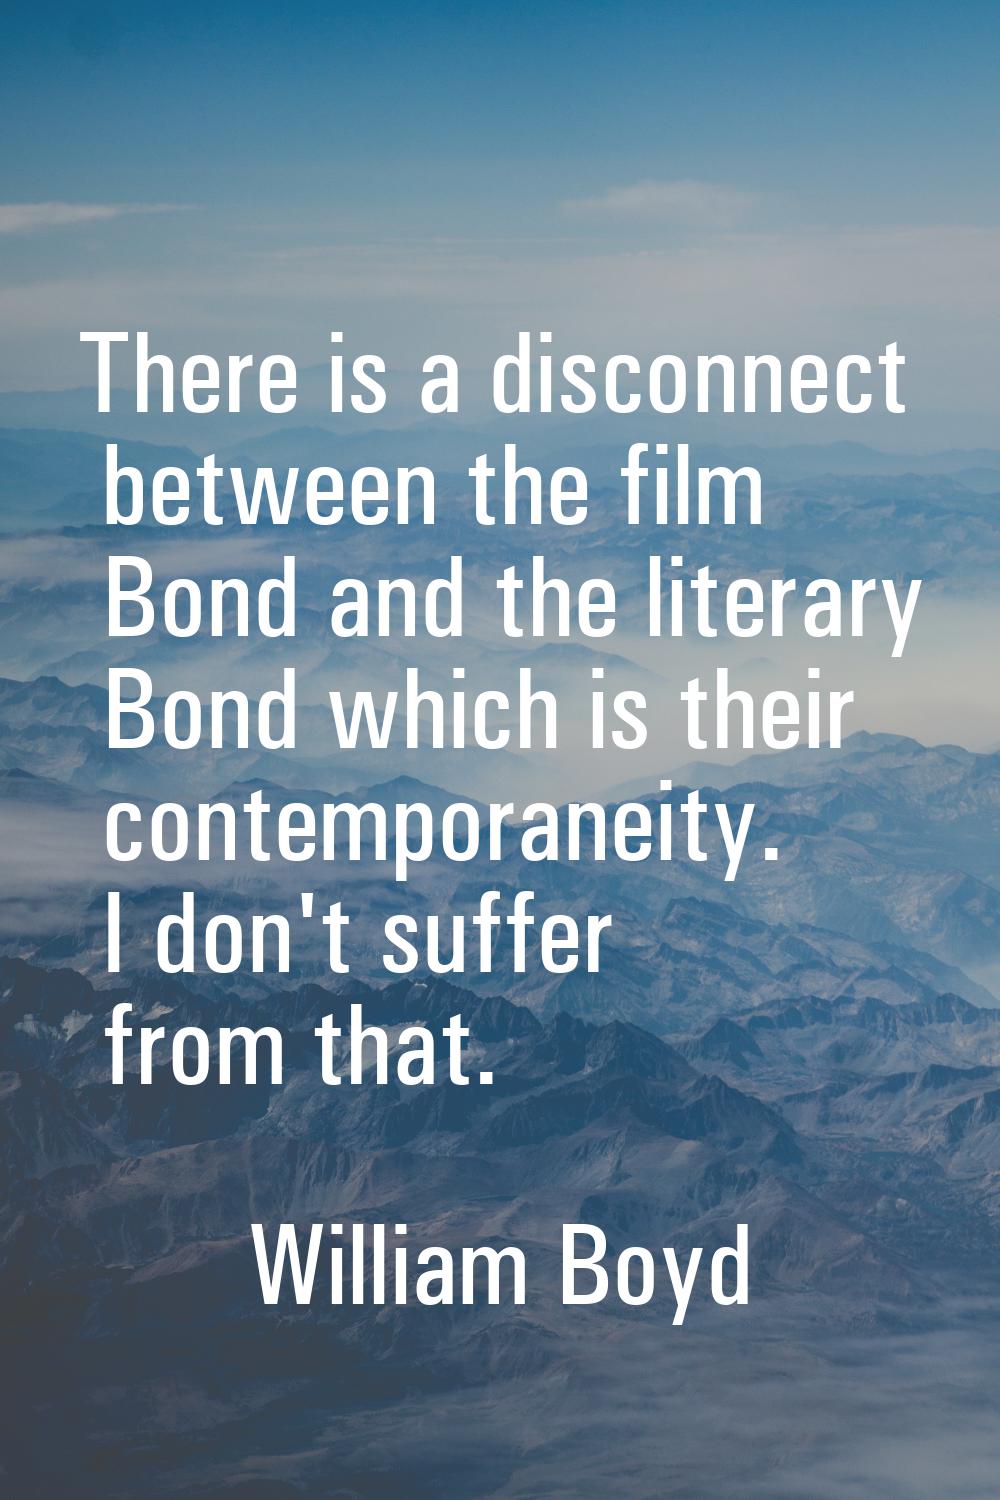 There is a disconnect between the film Bond and the literary Bond which is their contemporaneity. I